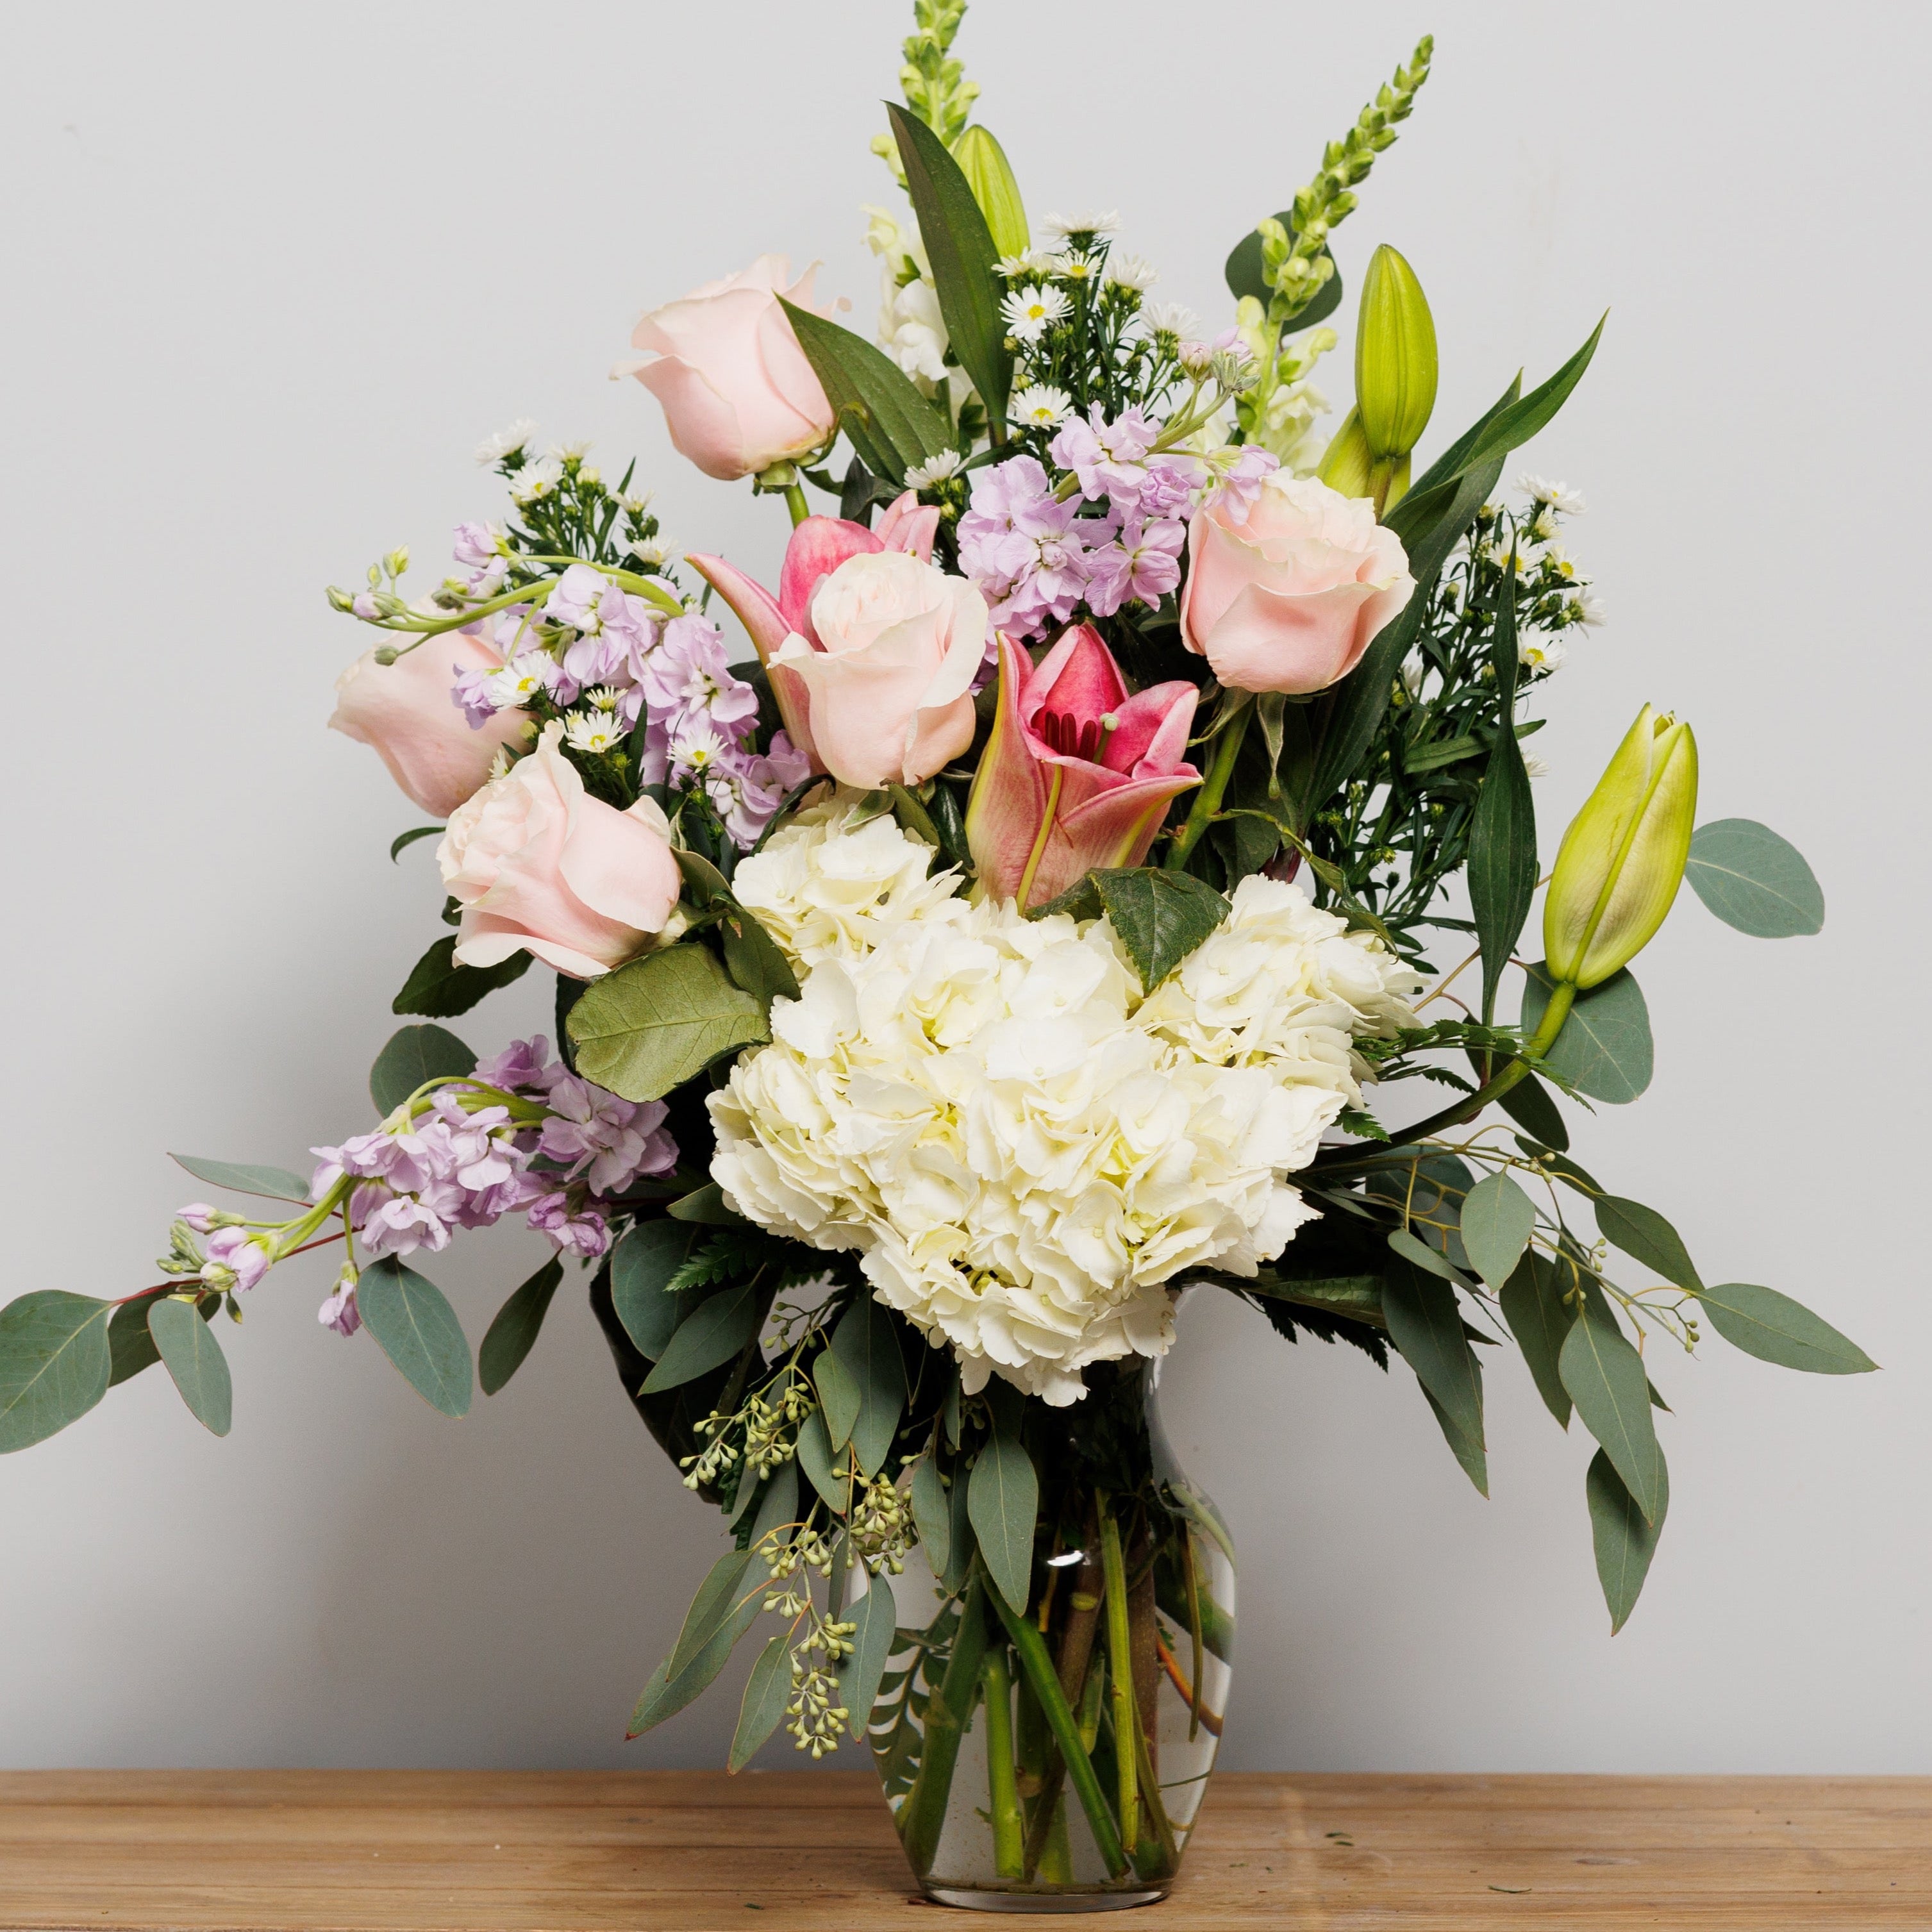 A vase arrangement with white hydrangea, pink roses and lilies, and lavender stock.